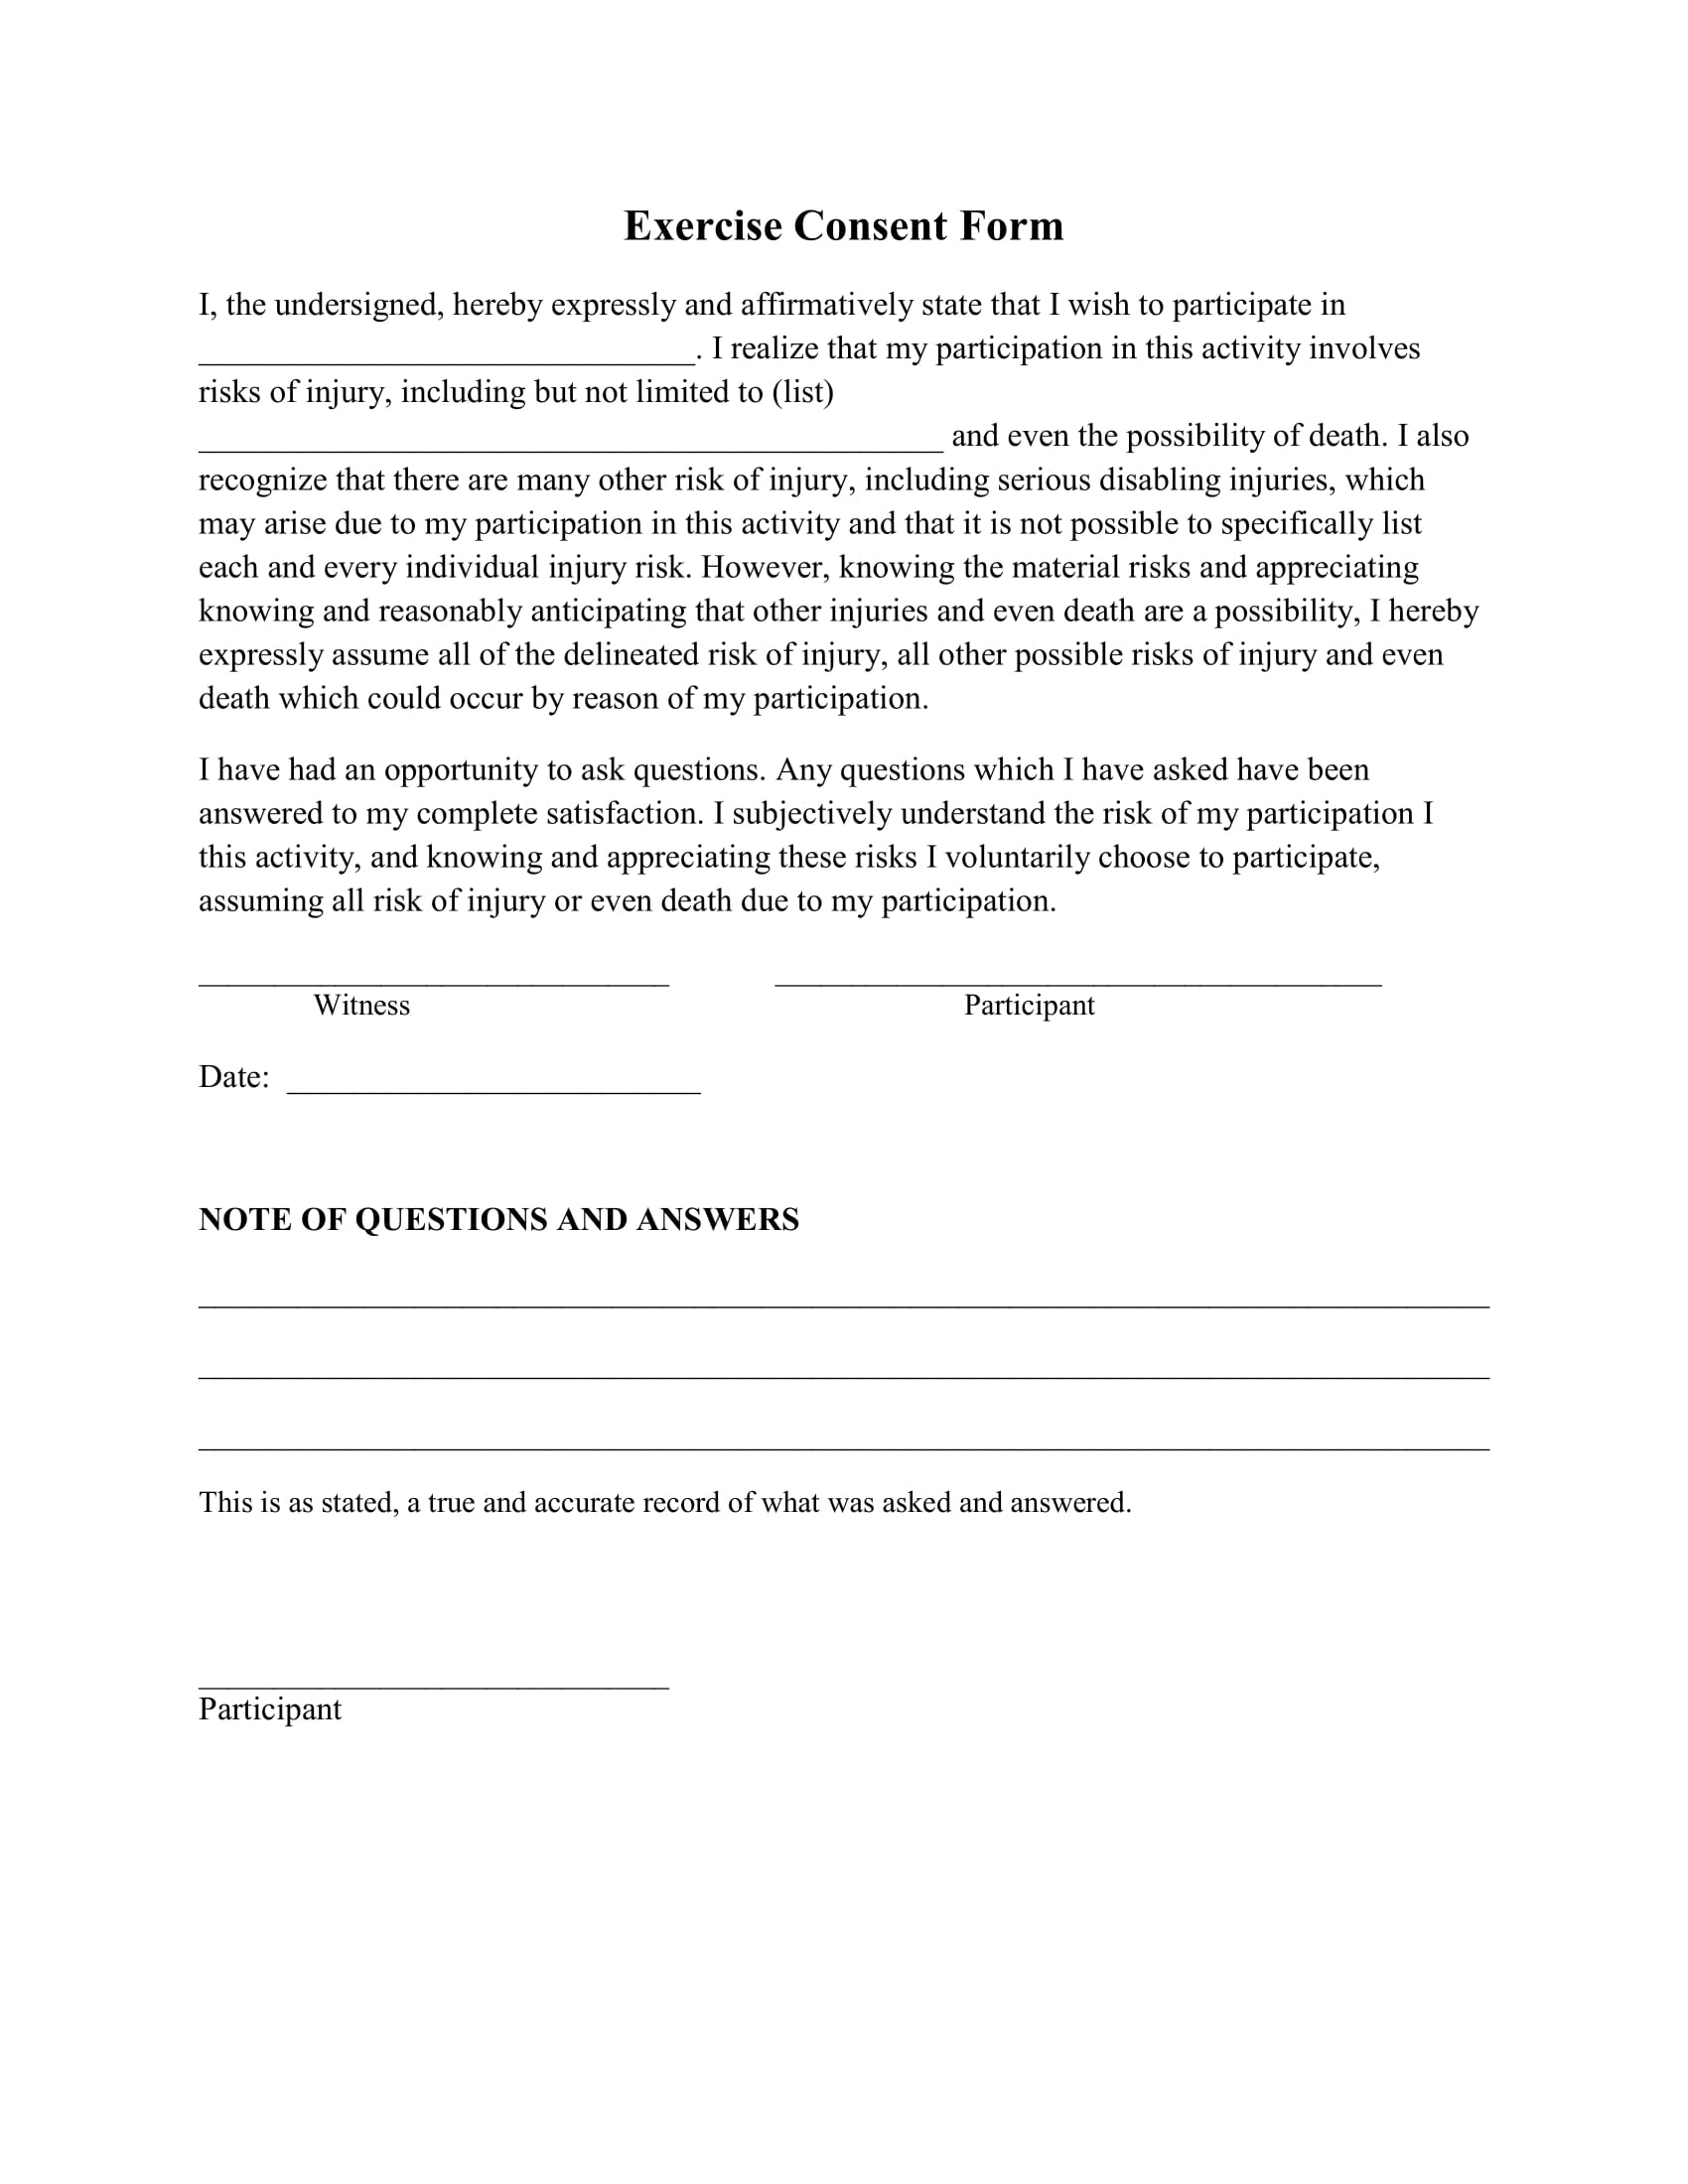 Exercise consent form you can download and print.